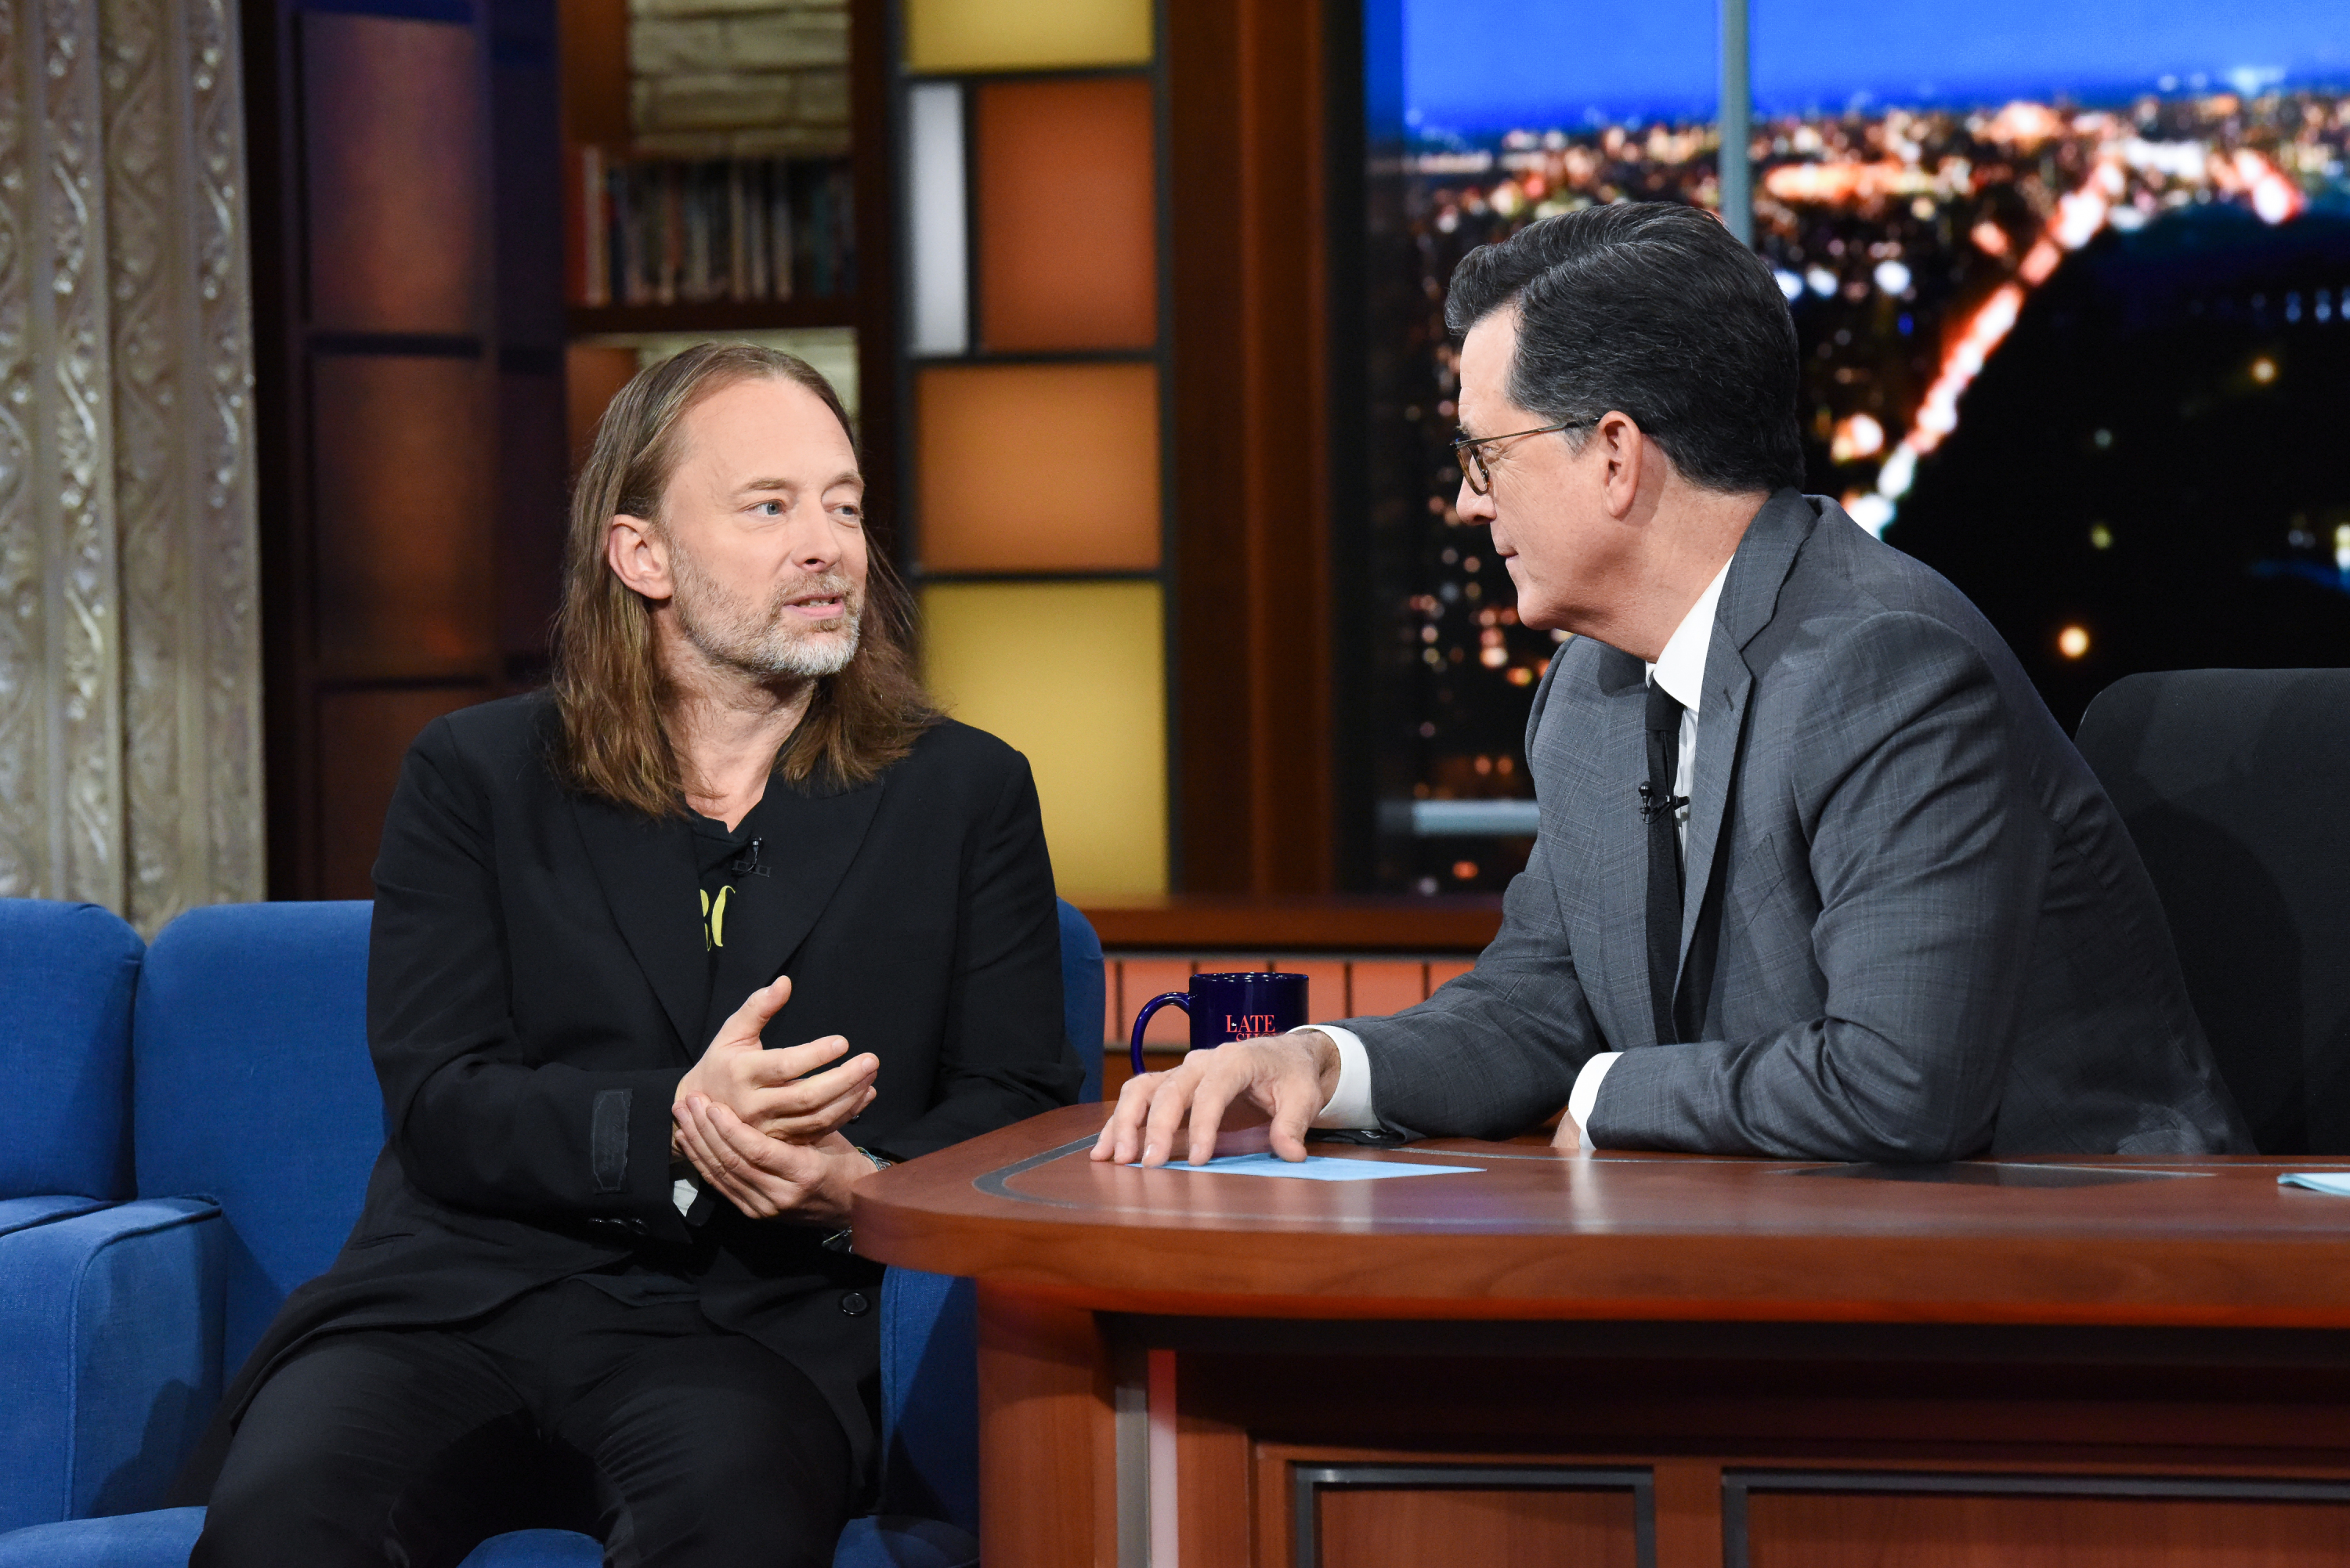 Radiohead's Thom York and Stephen Colbert on The Late Show